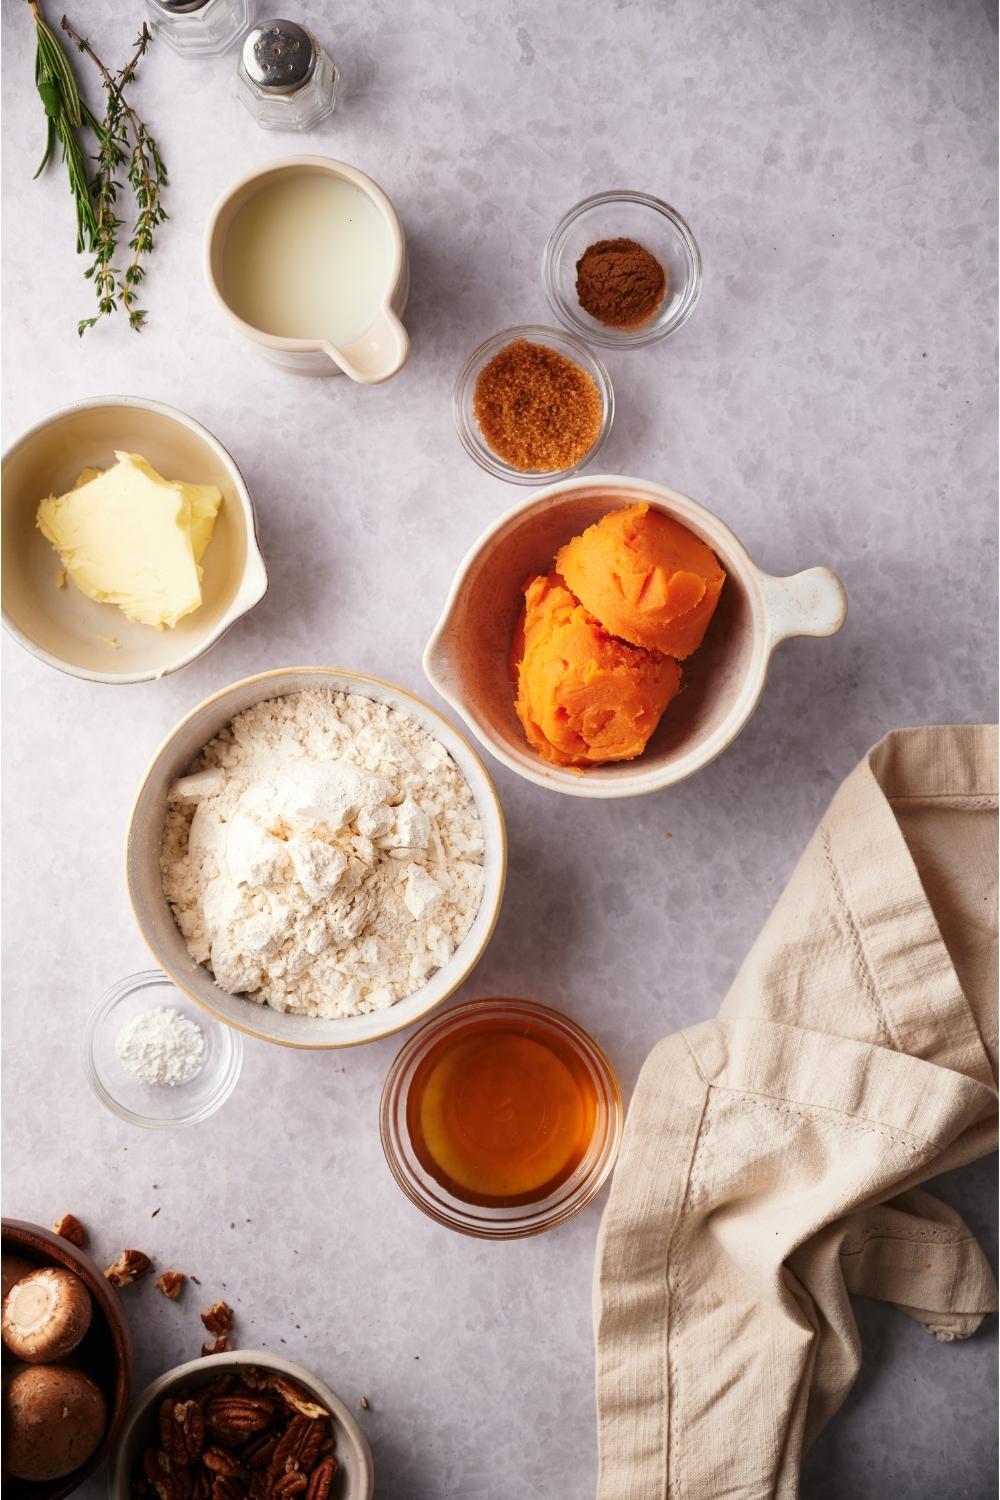 An assortment of ingredients for sweet potato biscuits including bowls of flour, sweet potatoes, milk, butter, maple syrup, and spices.